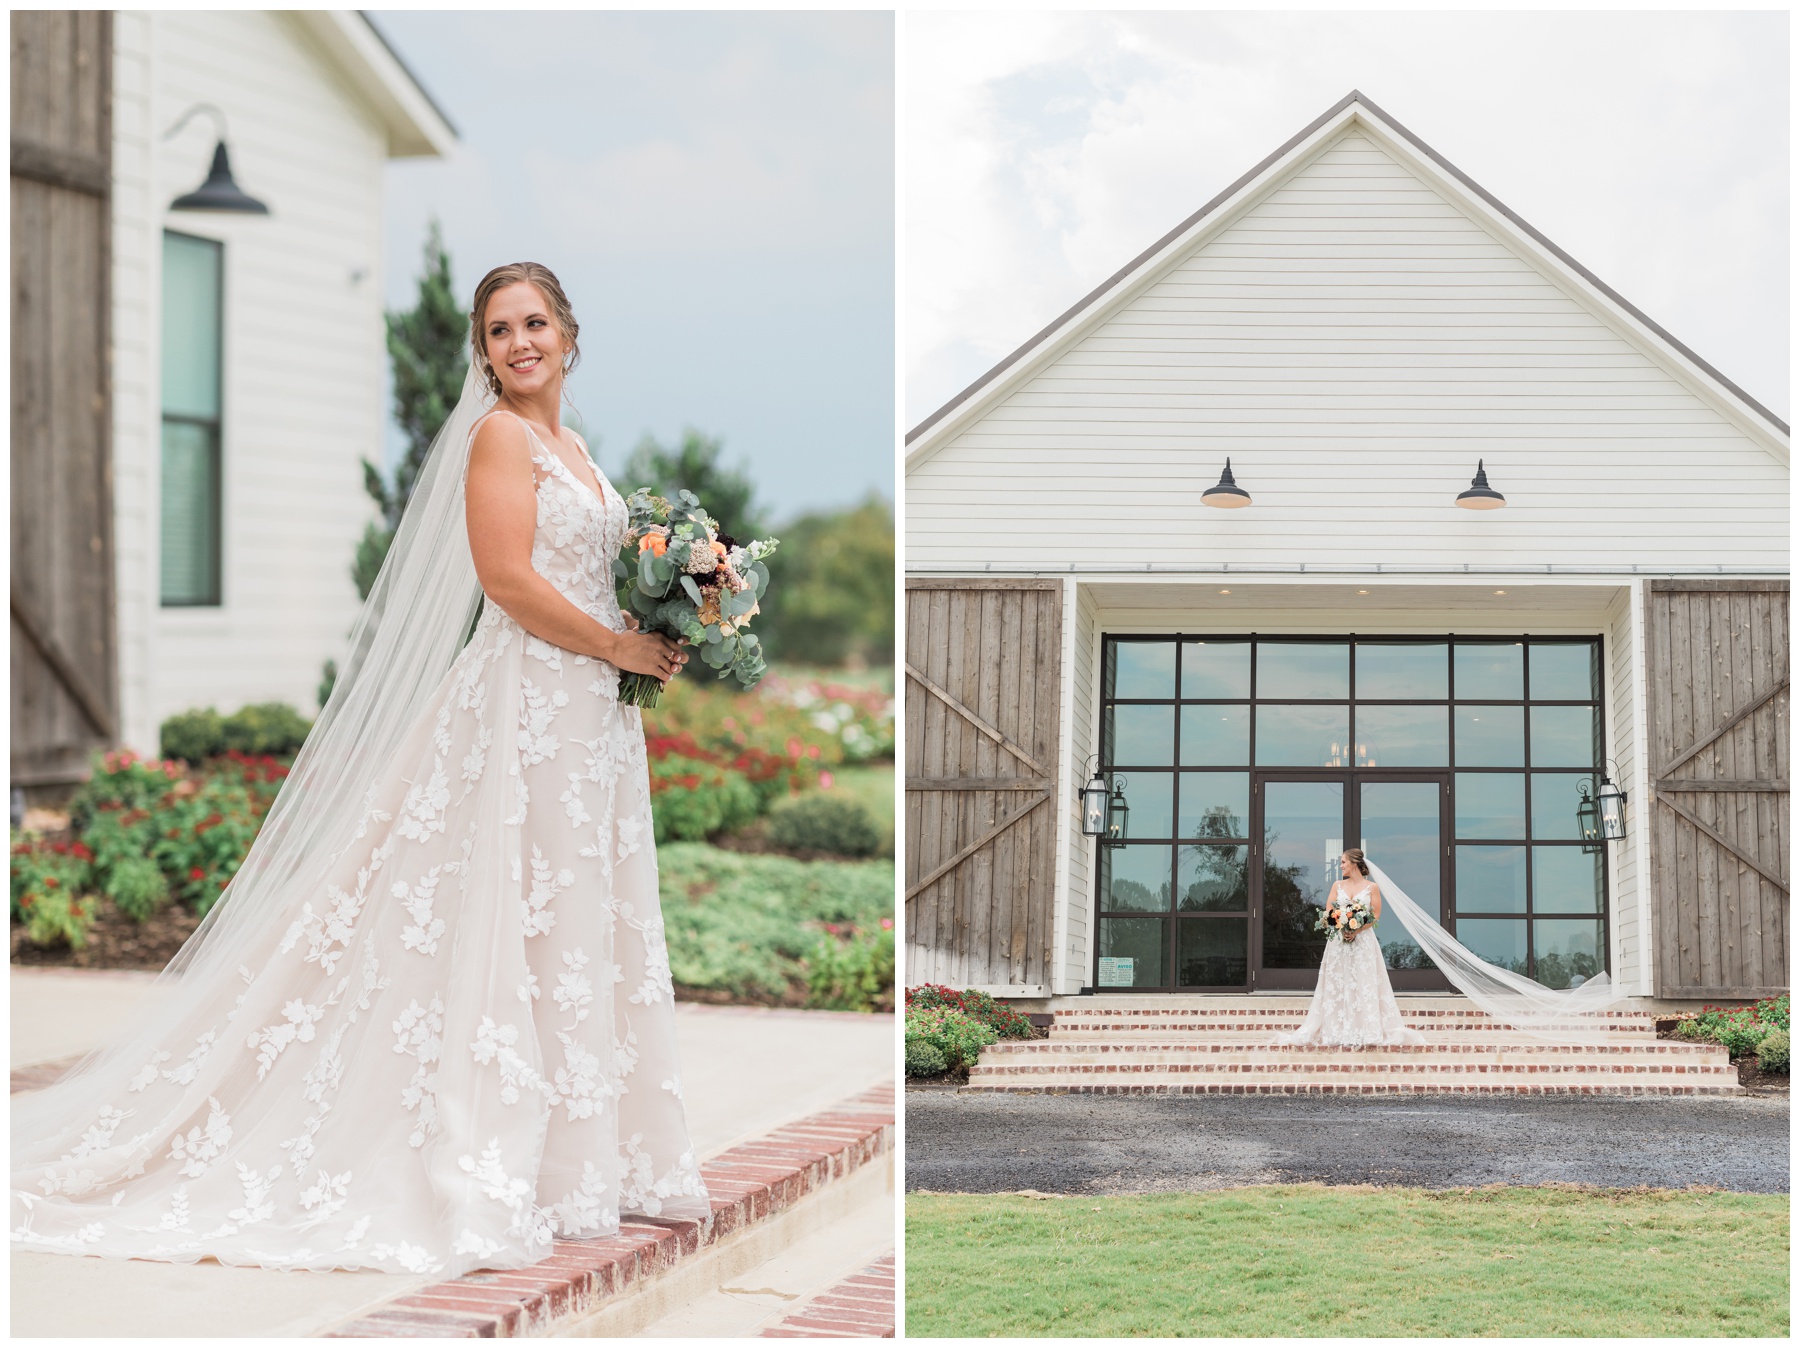 Bride posing in front of the barn at Deep in the Heart Farms